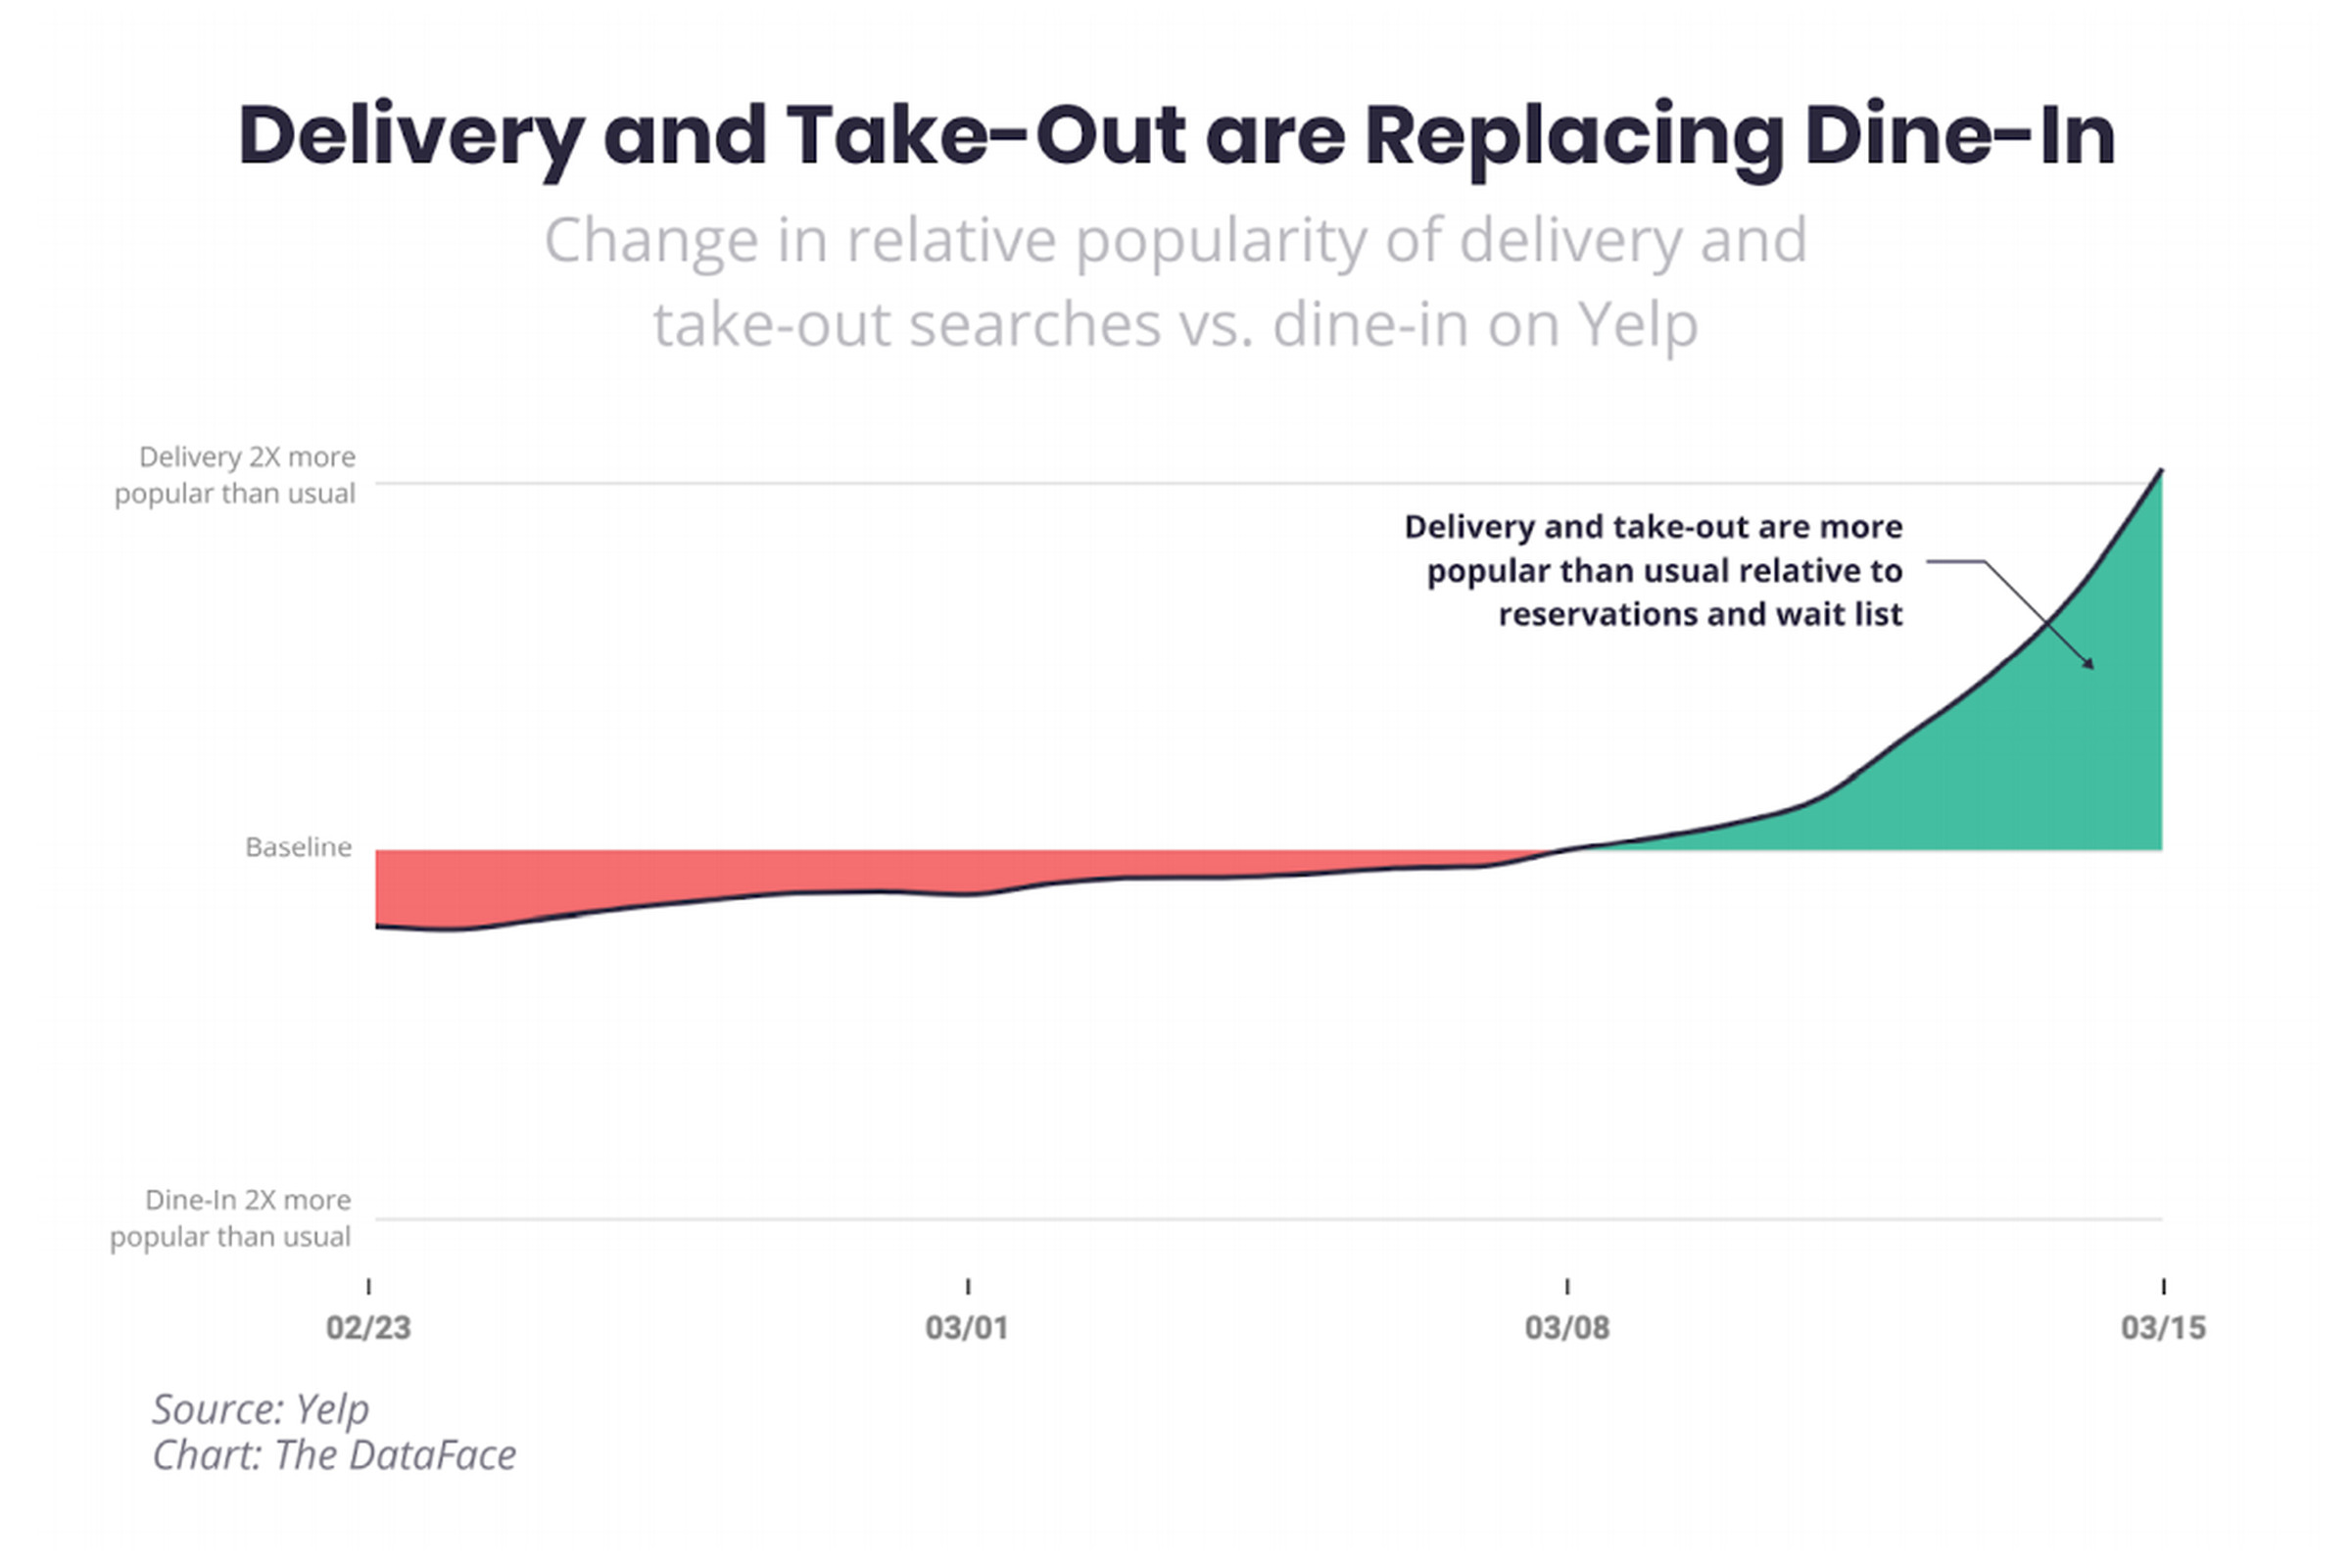 Yelp’s data suggests a large increase in the popularity of delivery and take-out.